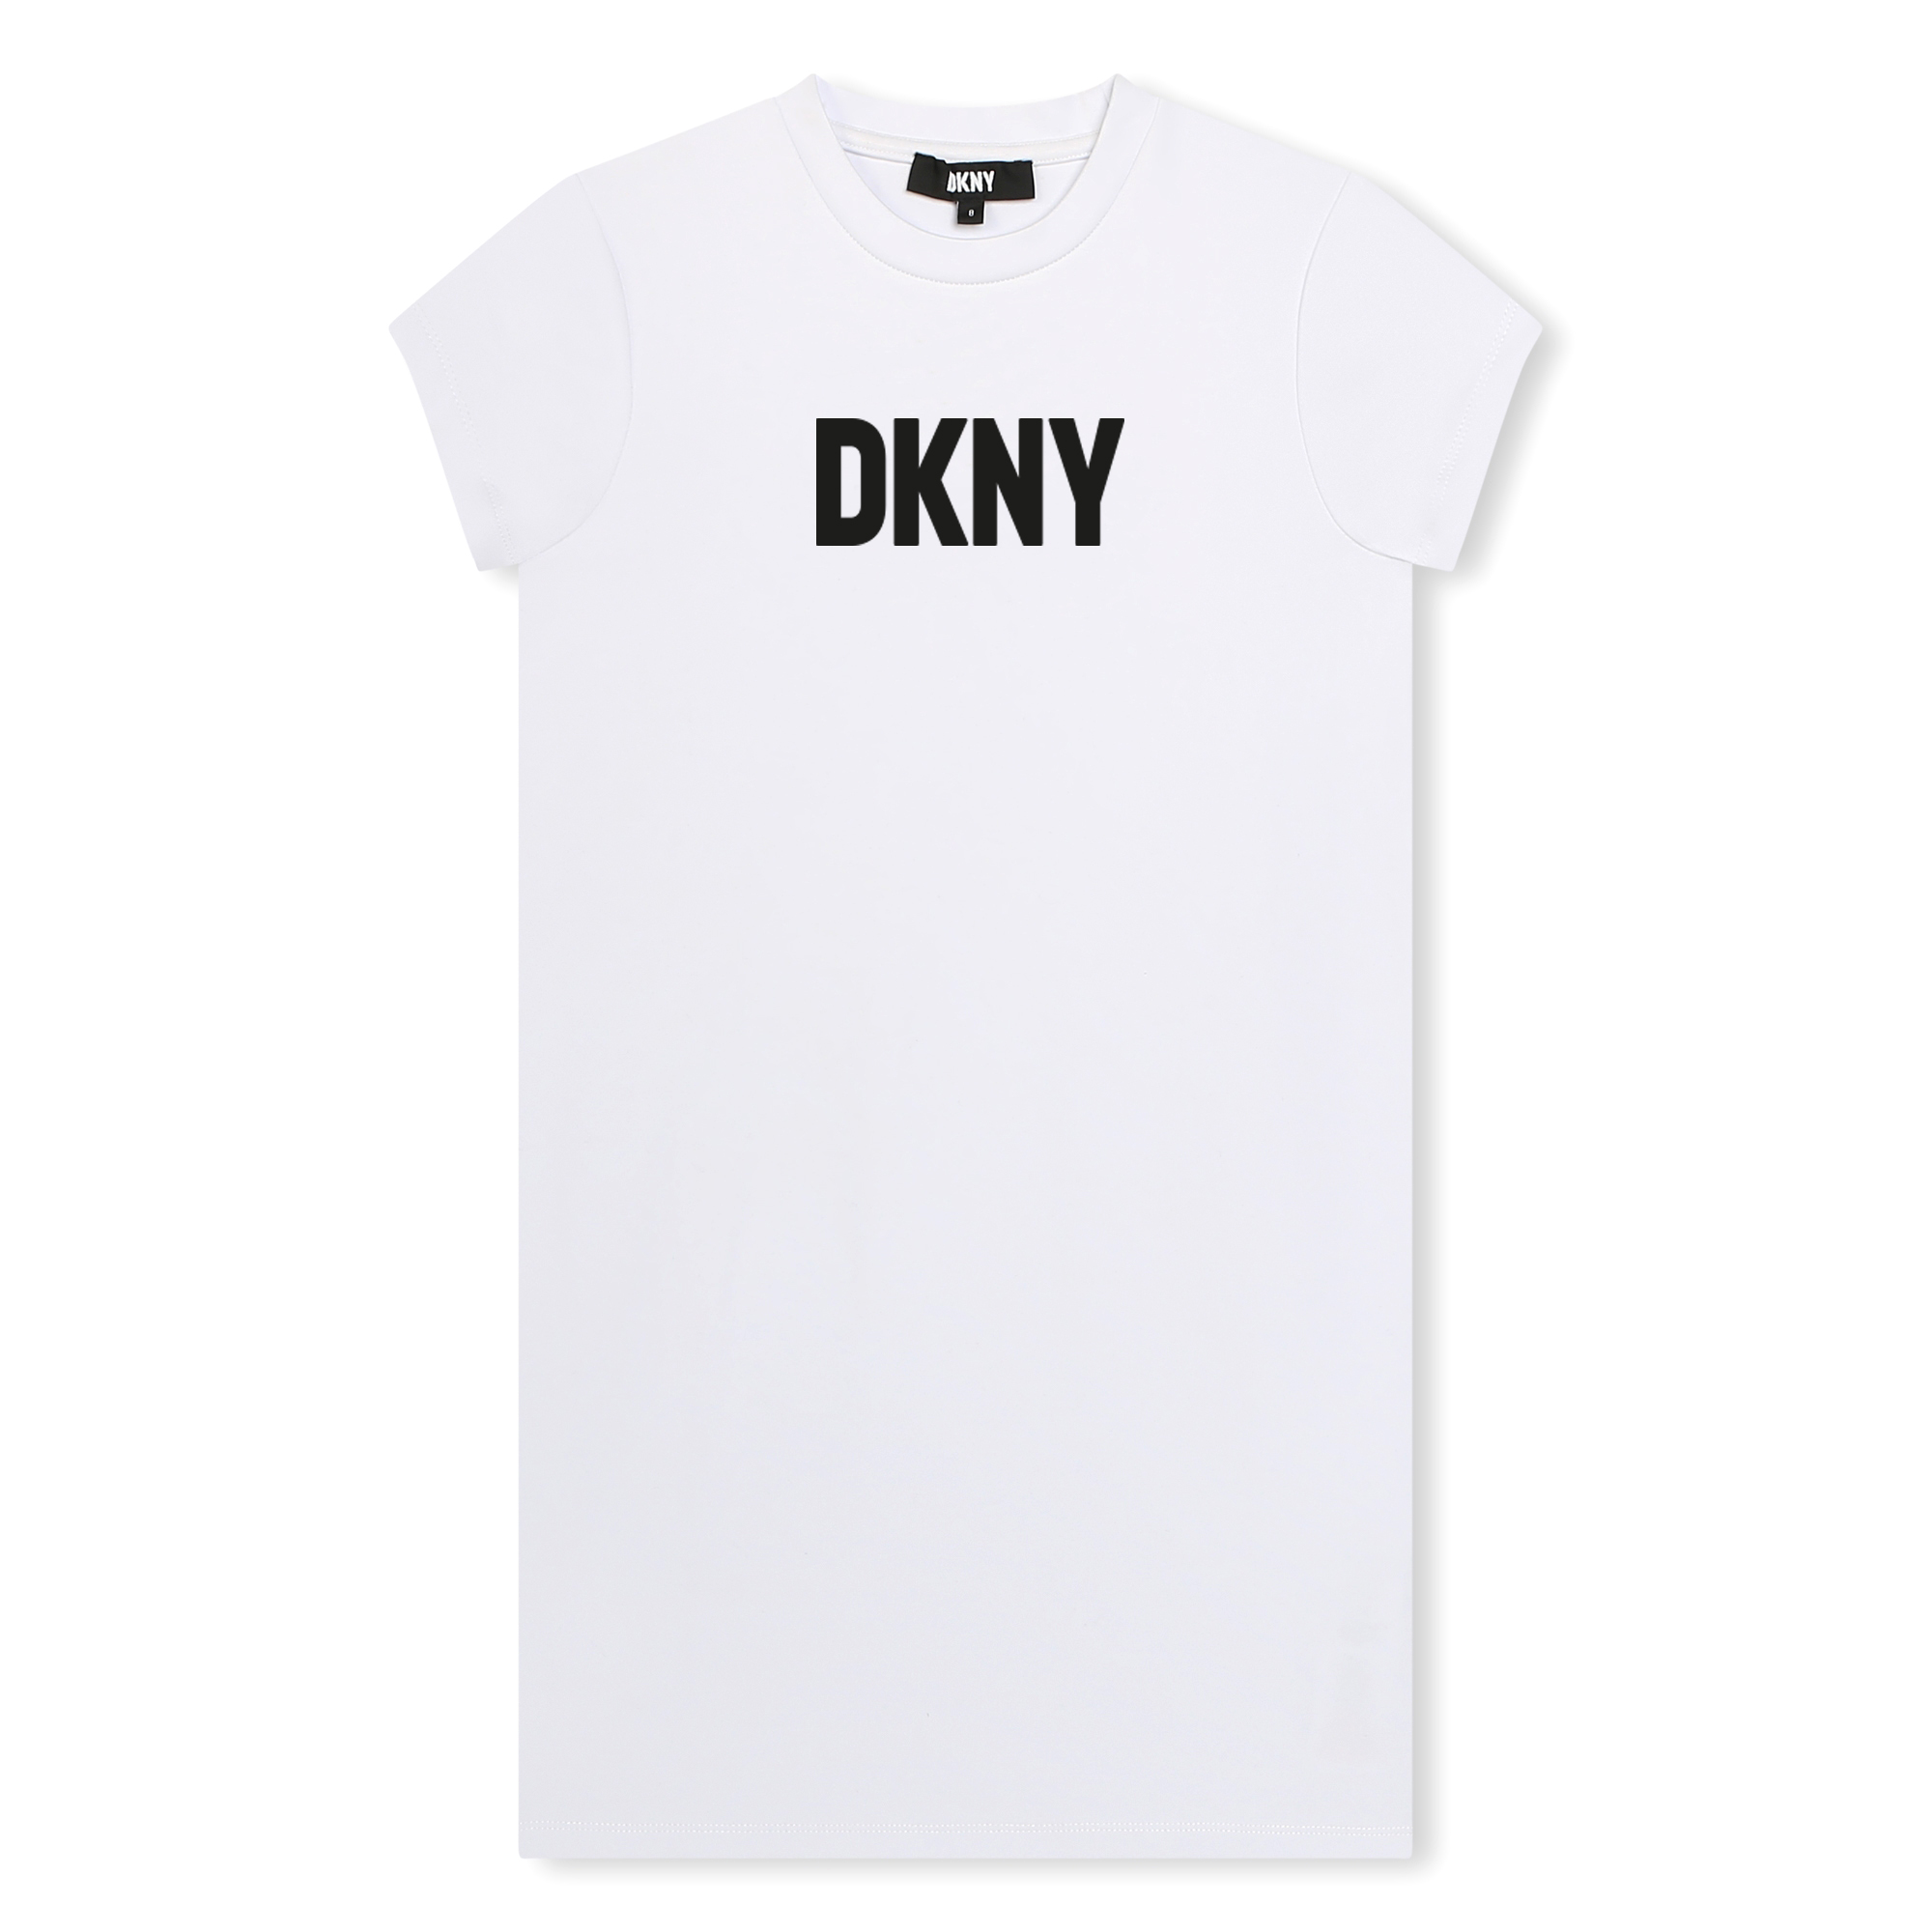 2-in-1 dress with straps DKNY for GIRL